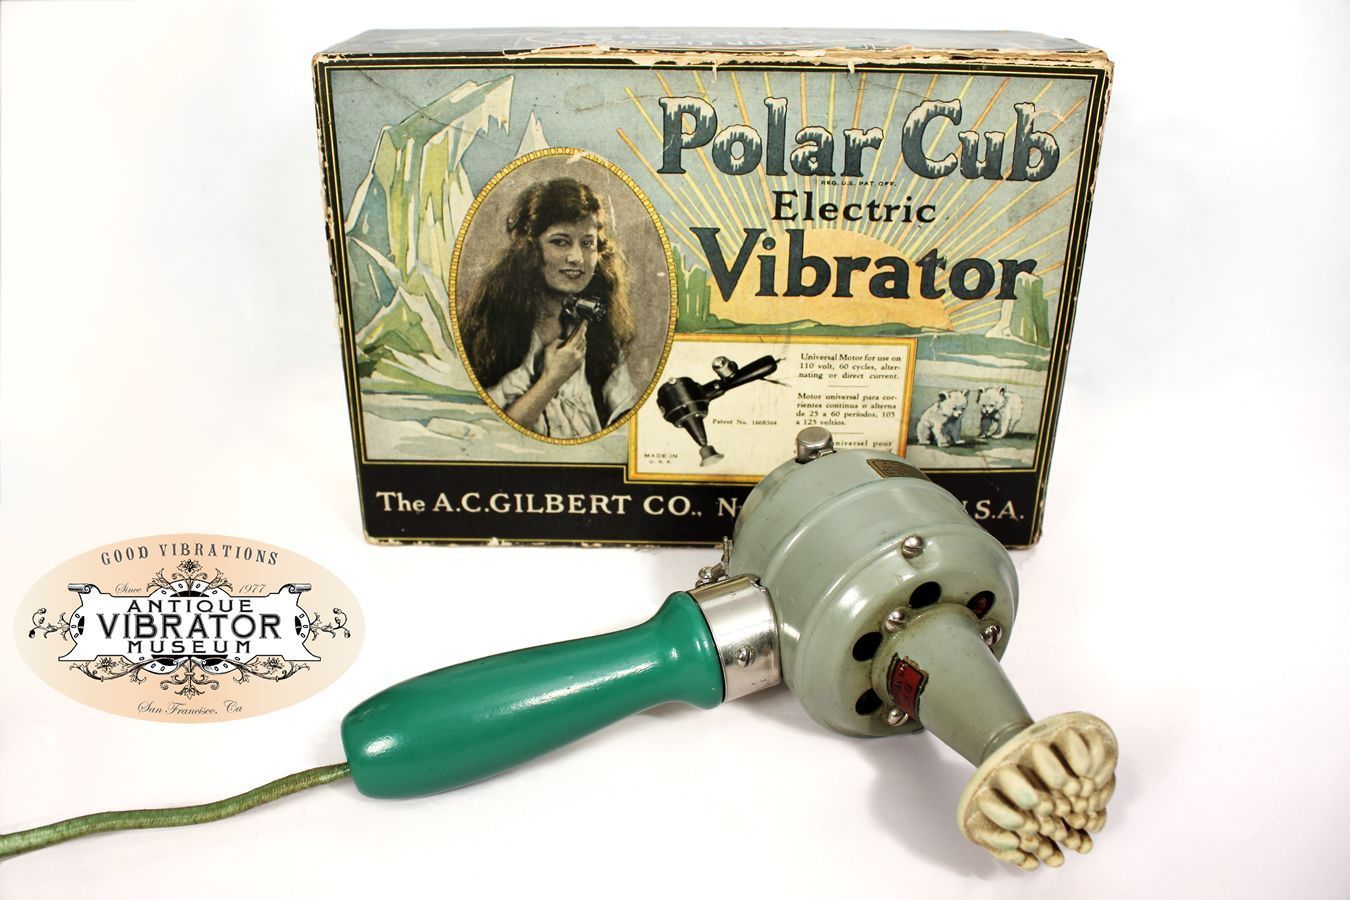 How was the vibrator invented